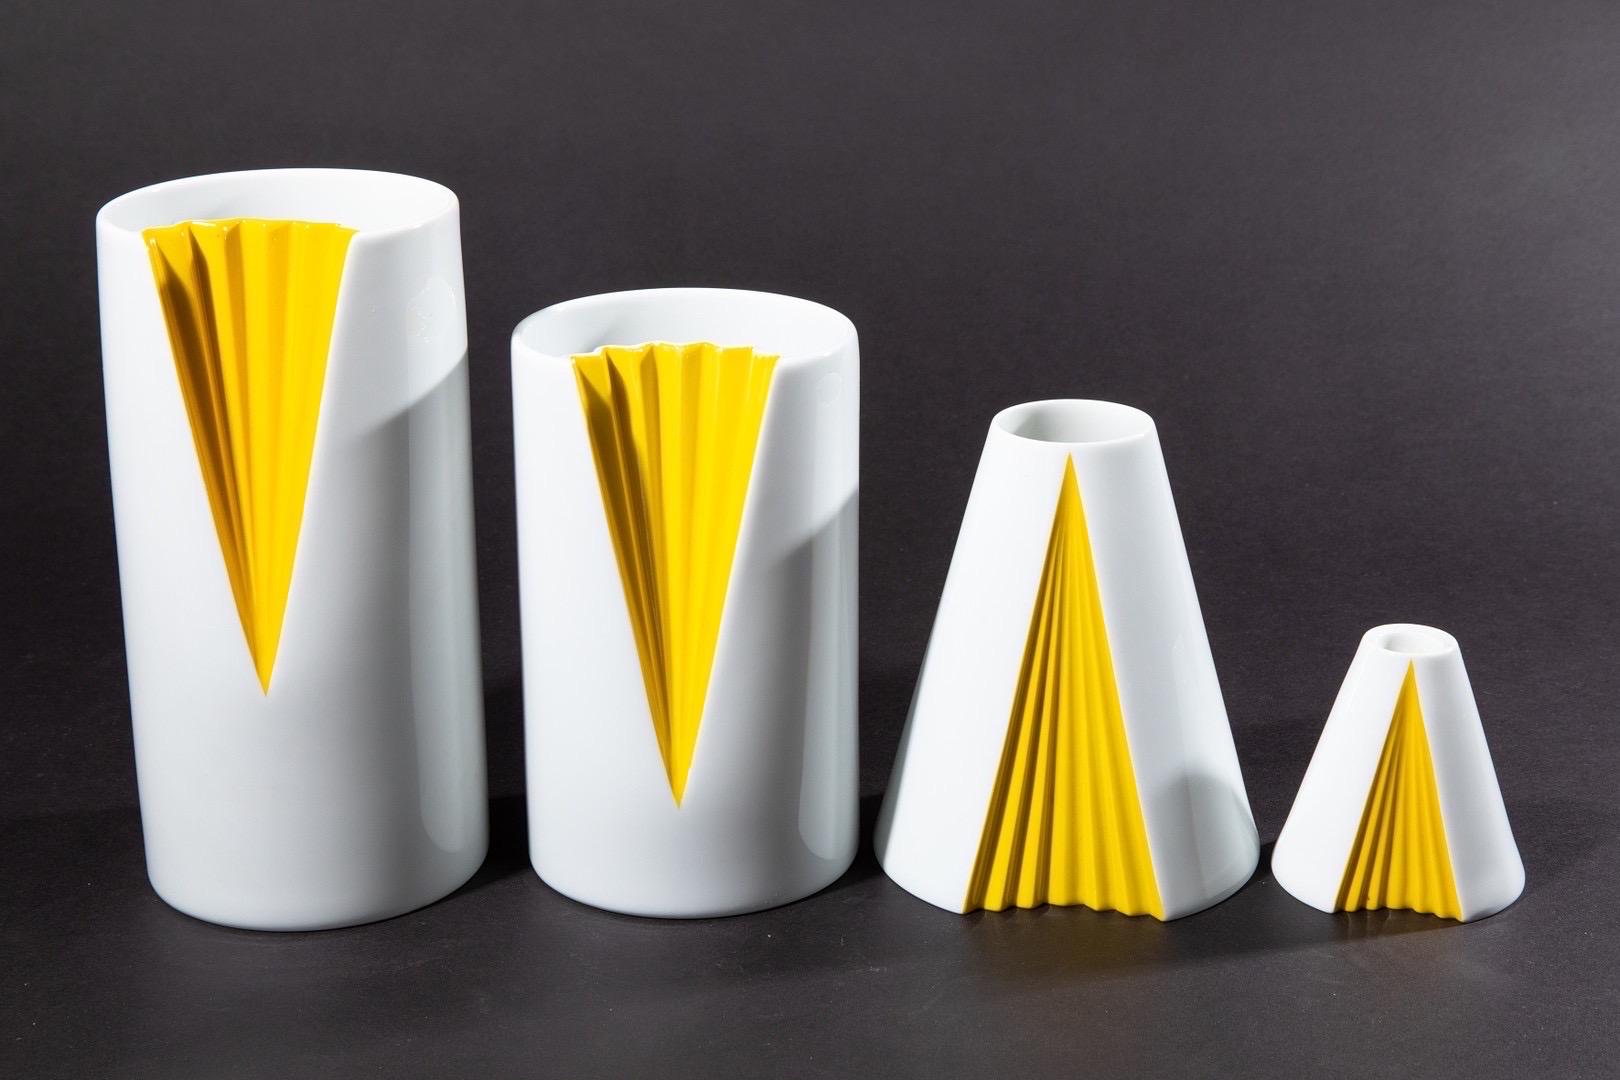 Set of 4 vases in white porcelain with a yellow colored glaze. Design by Ambrogjo Pozzi for Rosenthal Studio Line in 1985. The design is called plisse, and is modelled after a woman’s gown. The series was produced in 4 different sizes, and this set